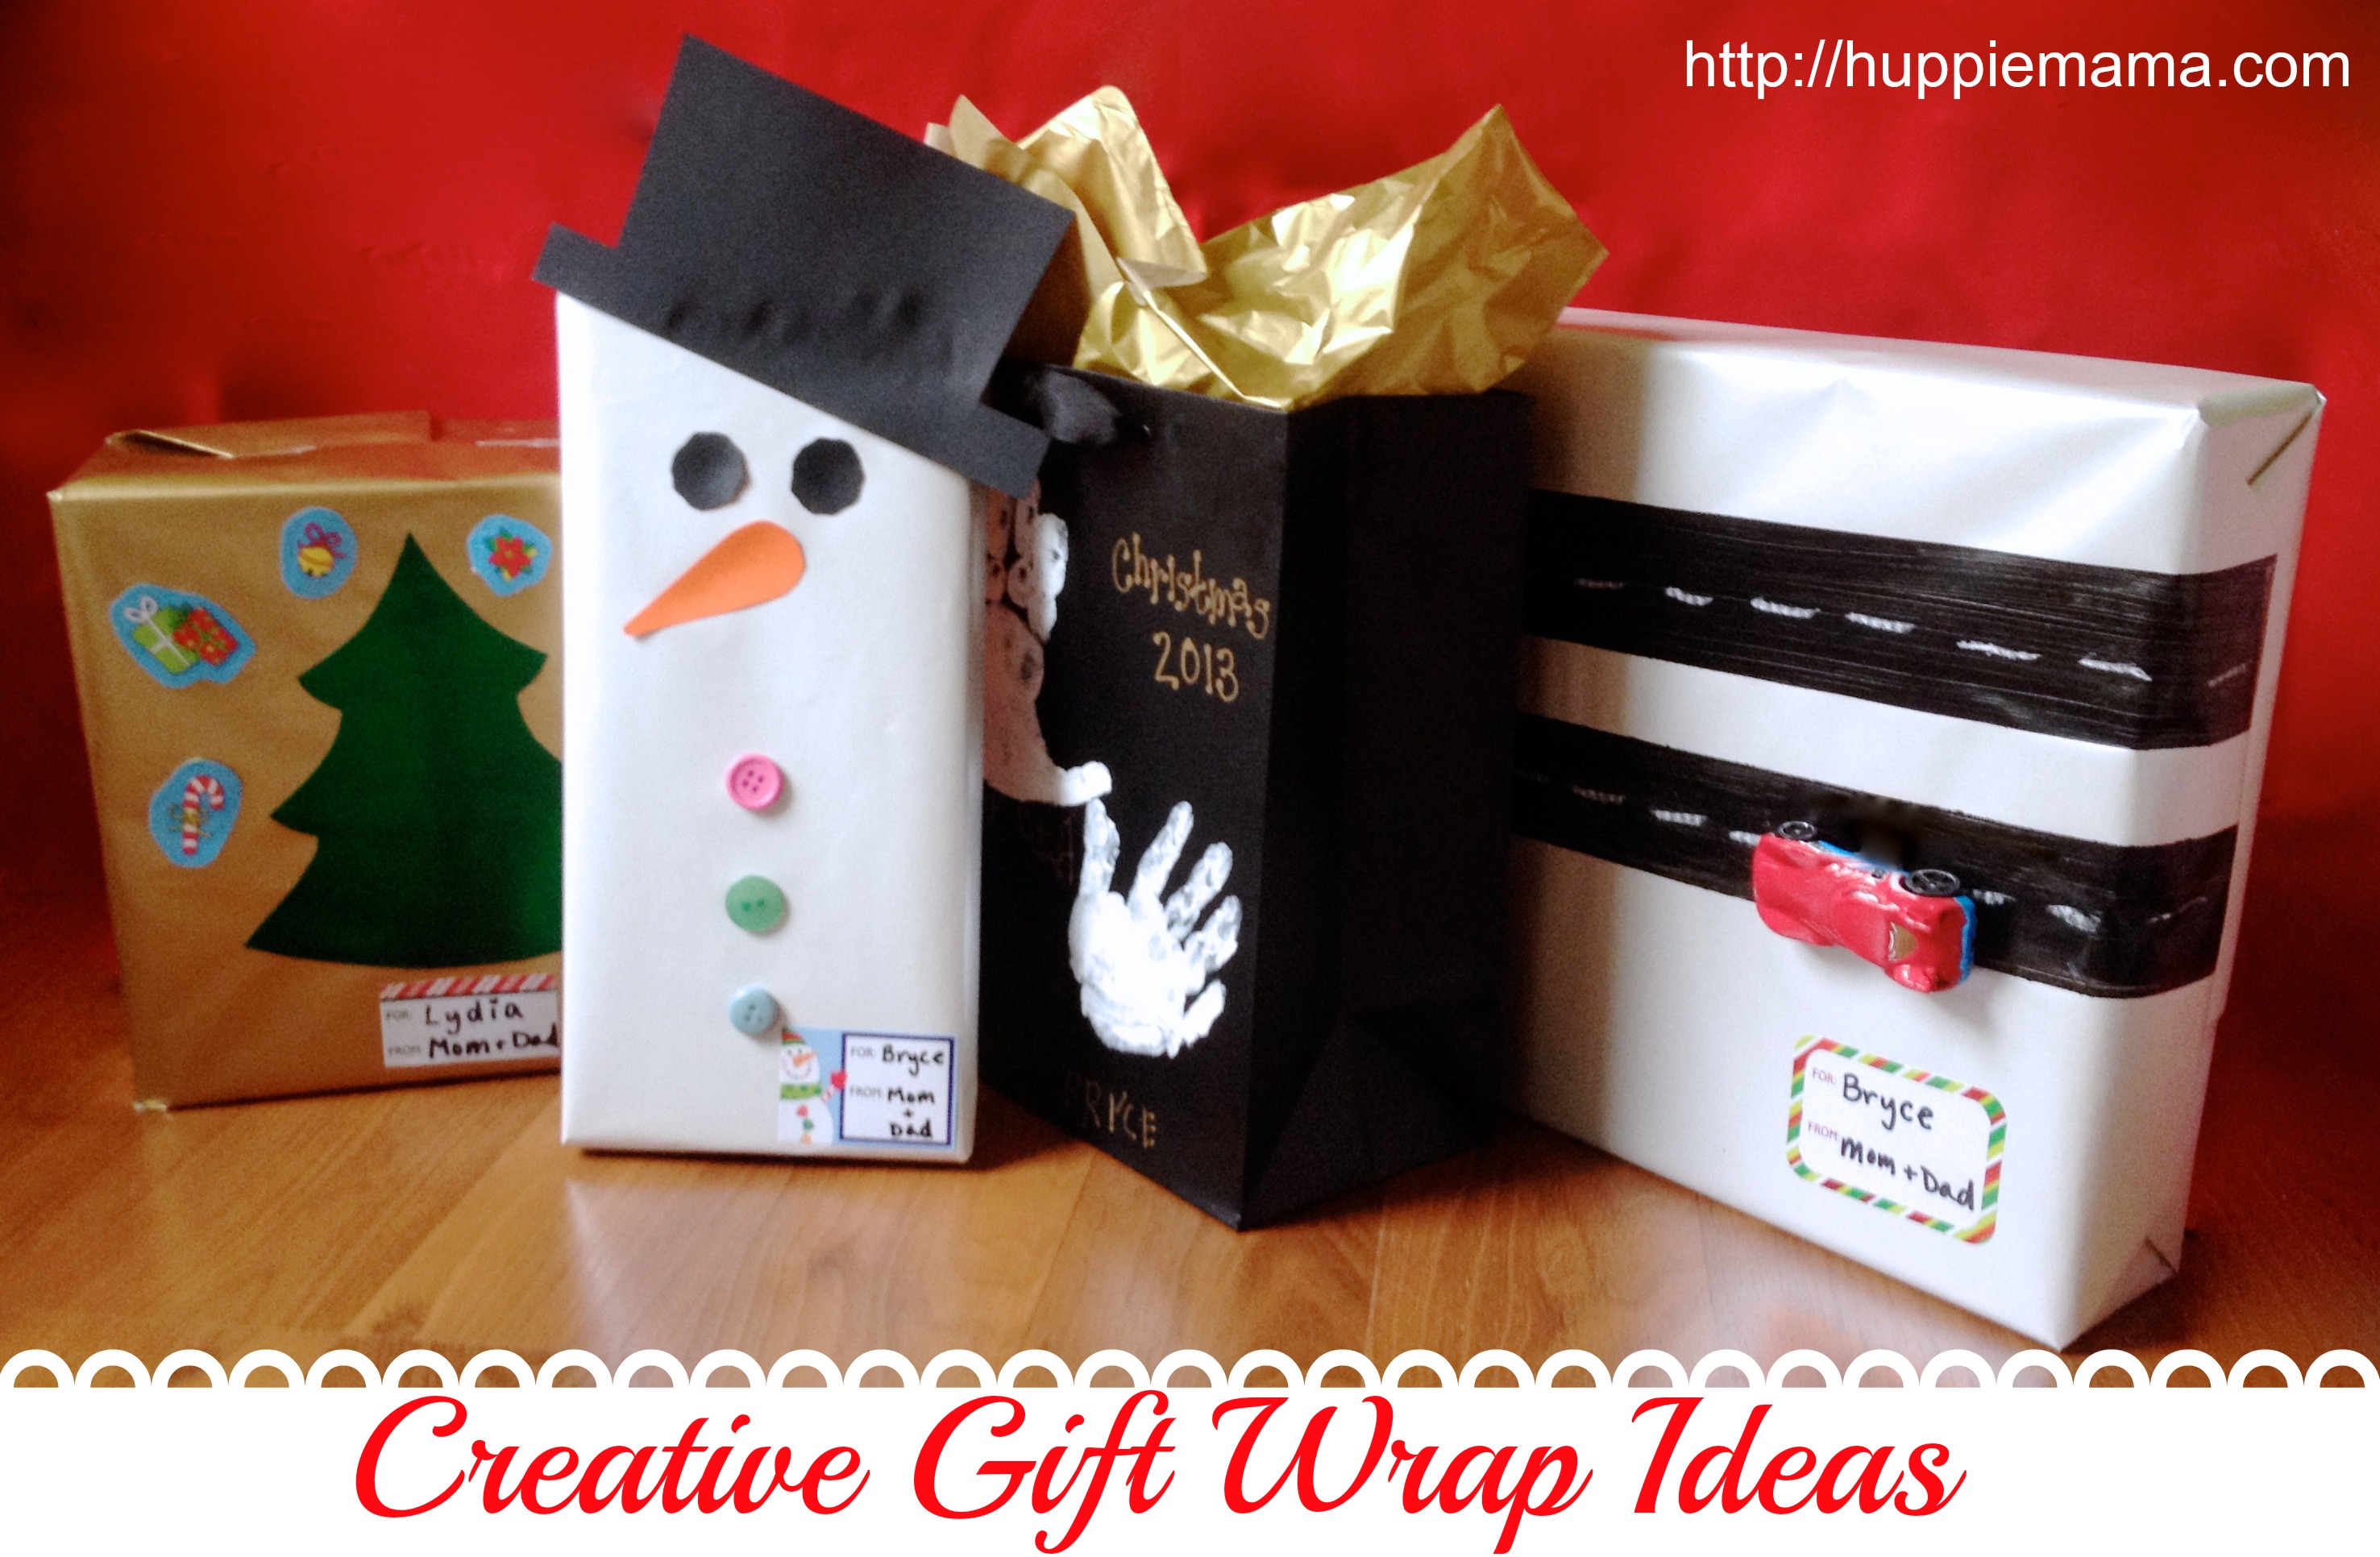 Pretty Wrapping Paper + Thoughtful Gift Guide